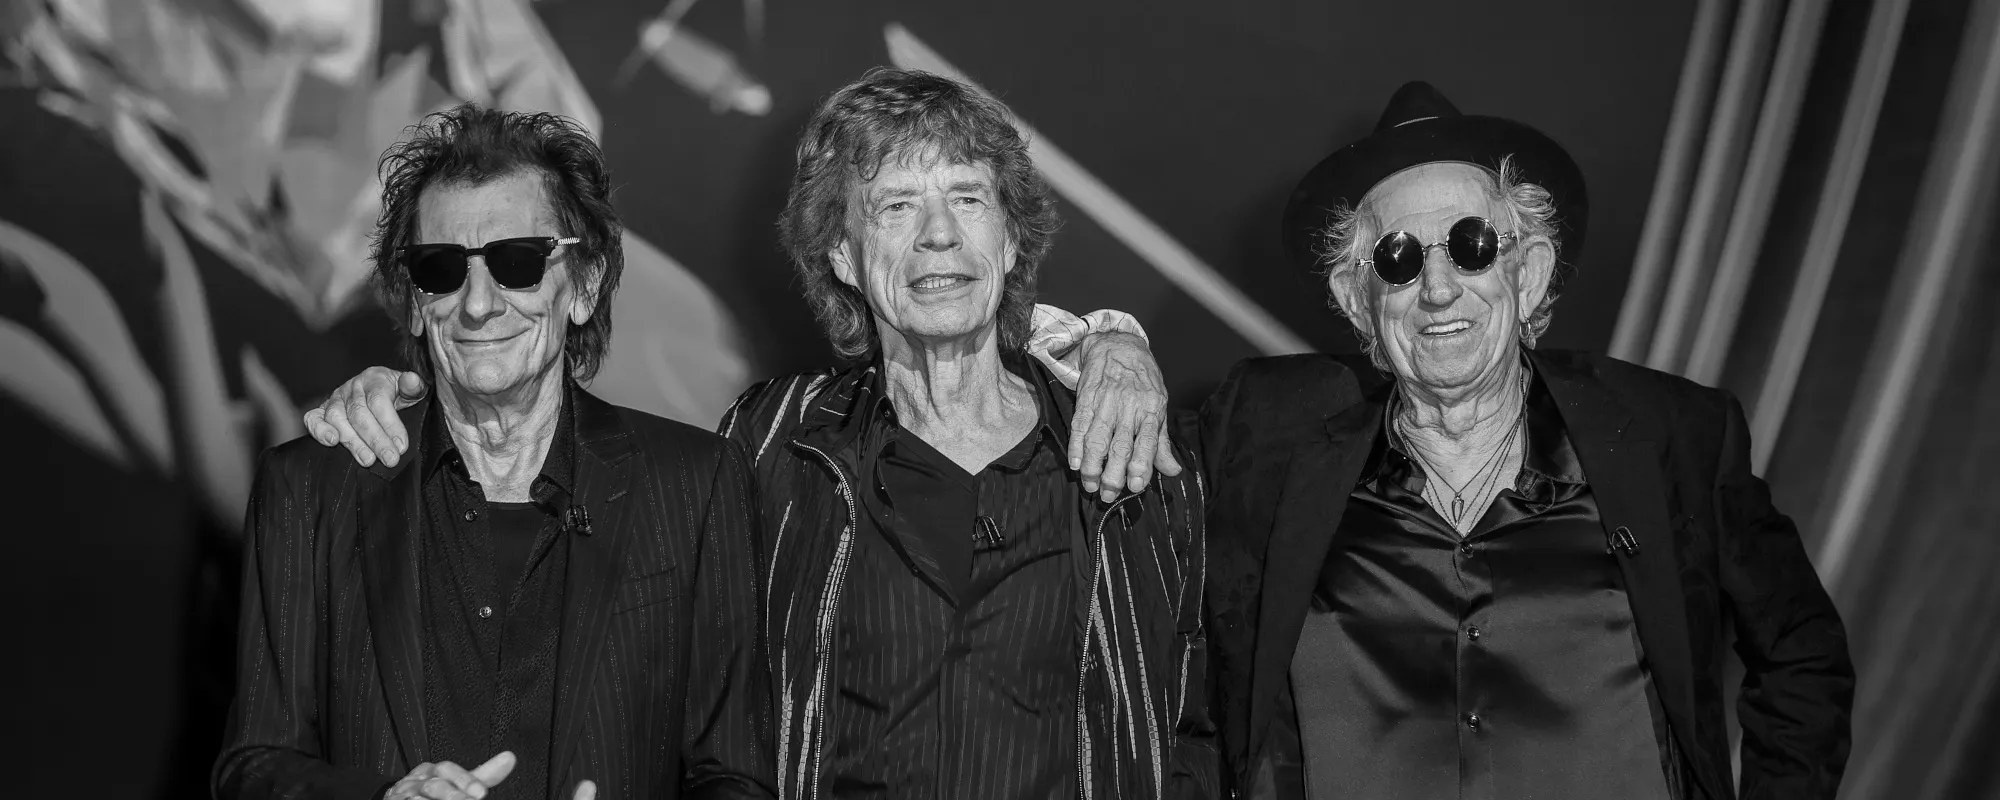 The Rolling Stones Filming Documentary with Production Team Behind ‘The Kardashians’